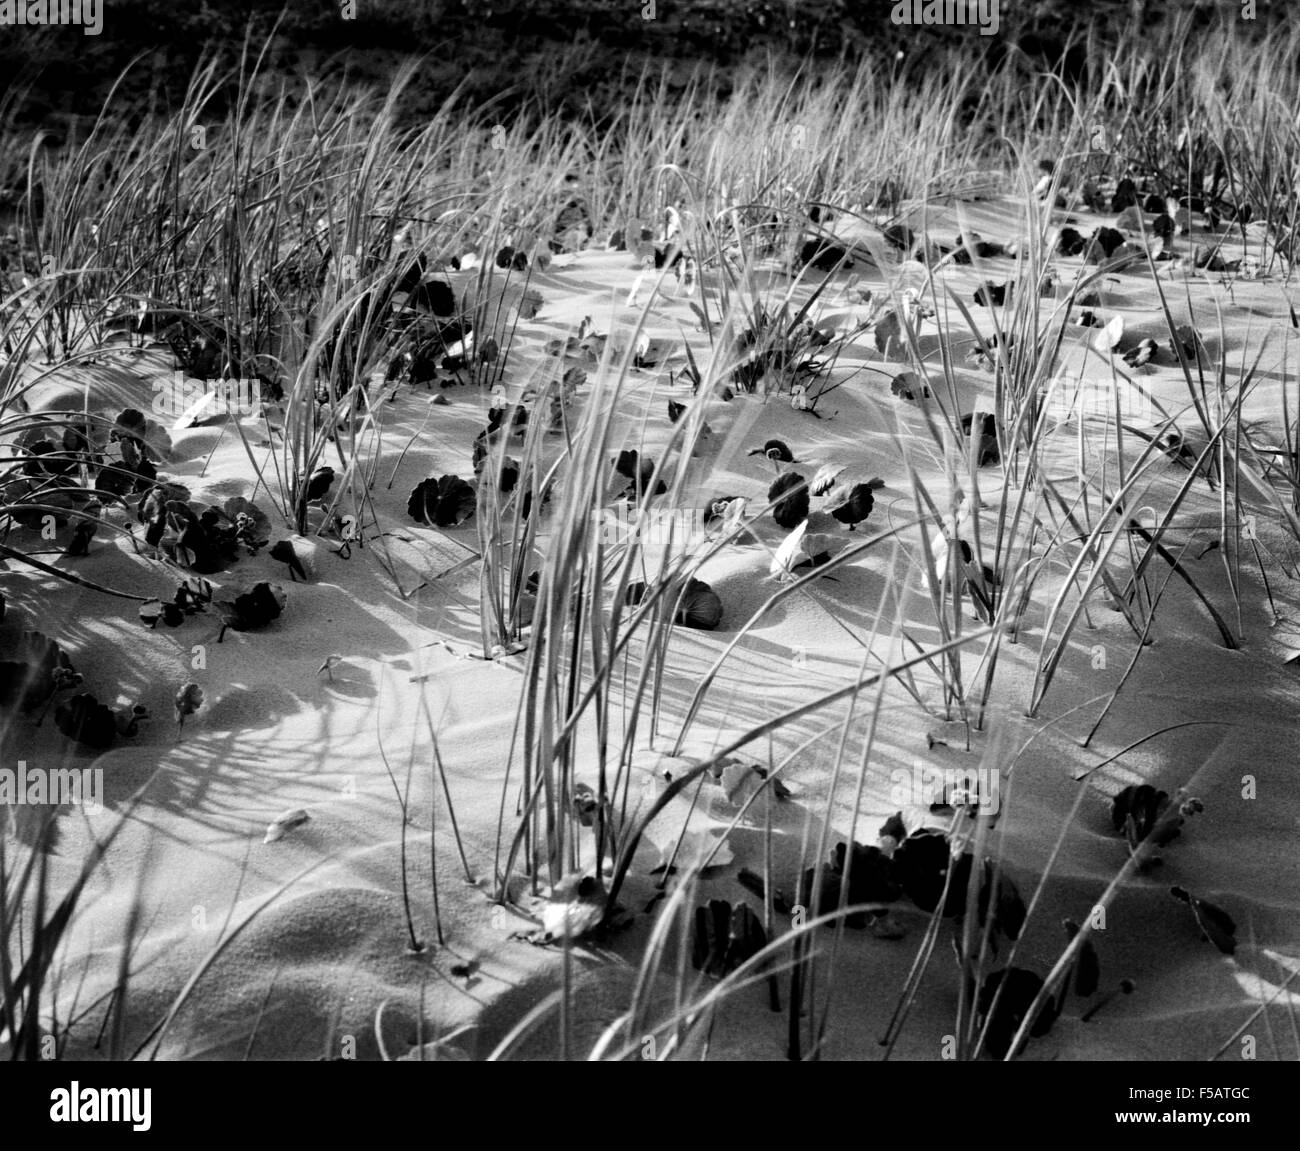 Dune Black and White Stock Photos & Images - Alamy